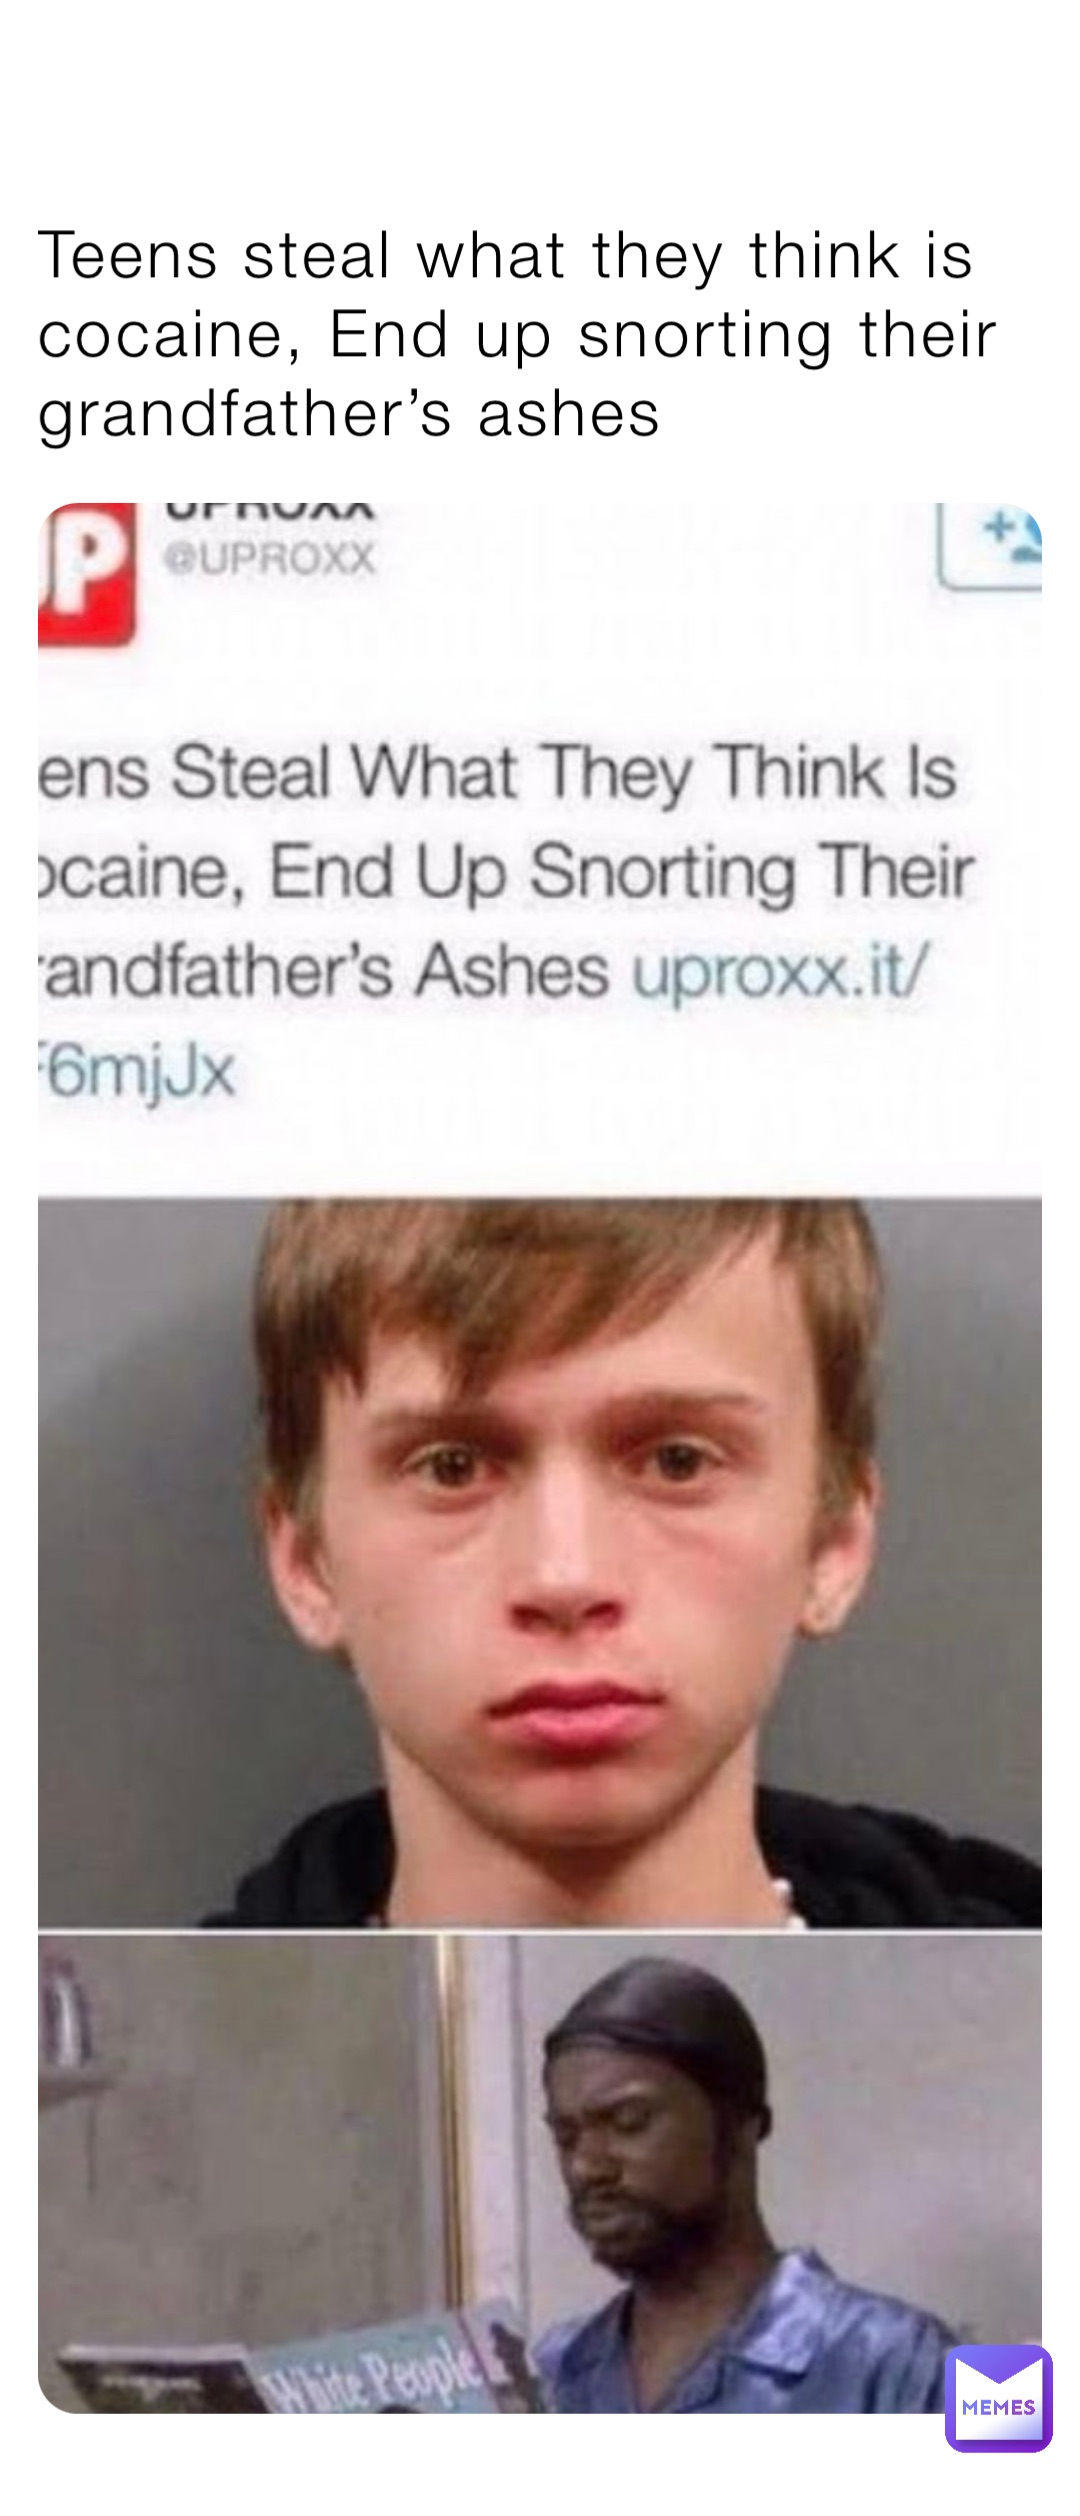 Teens steal what they think is cocaine, End up snorting their grandfather’s ashes